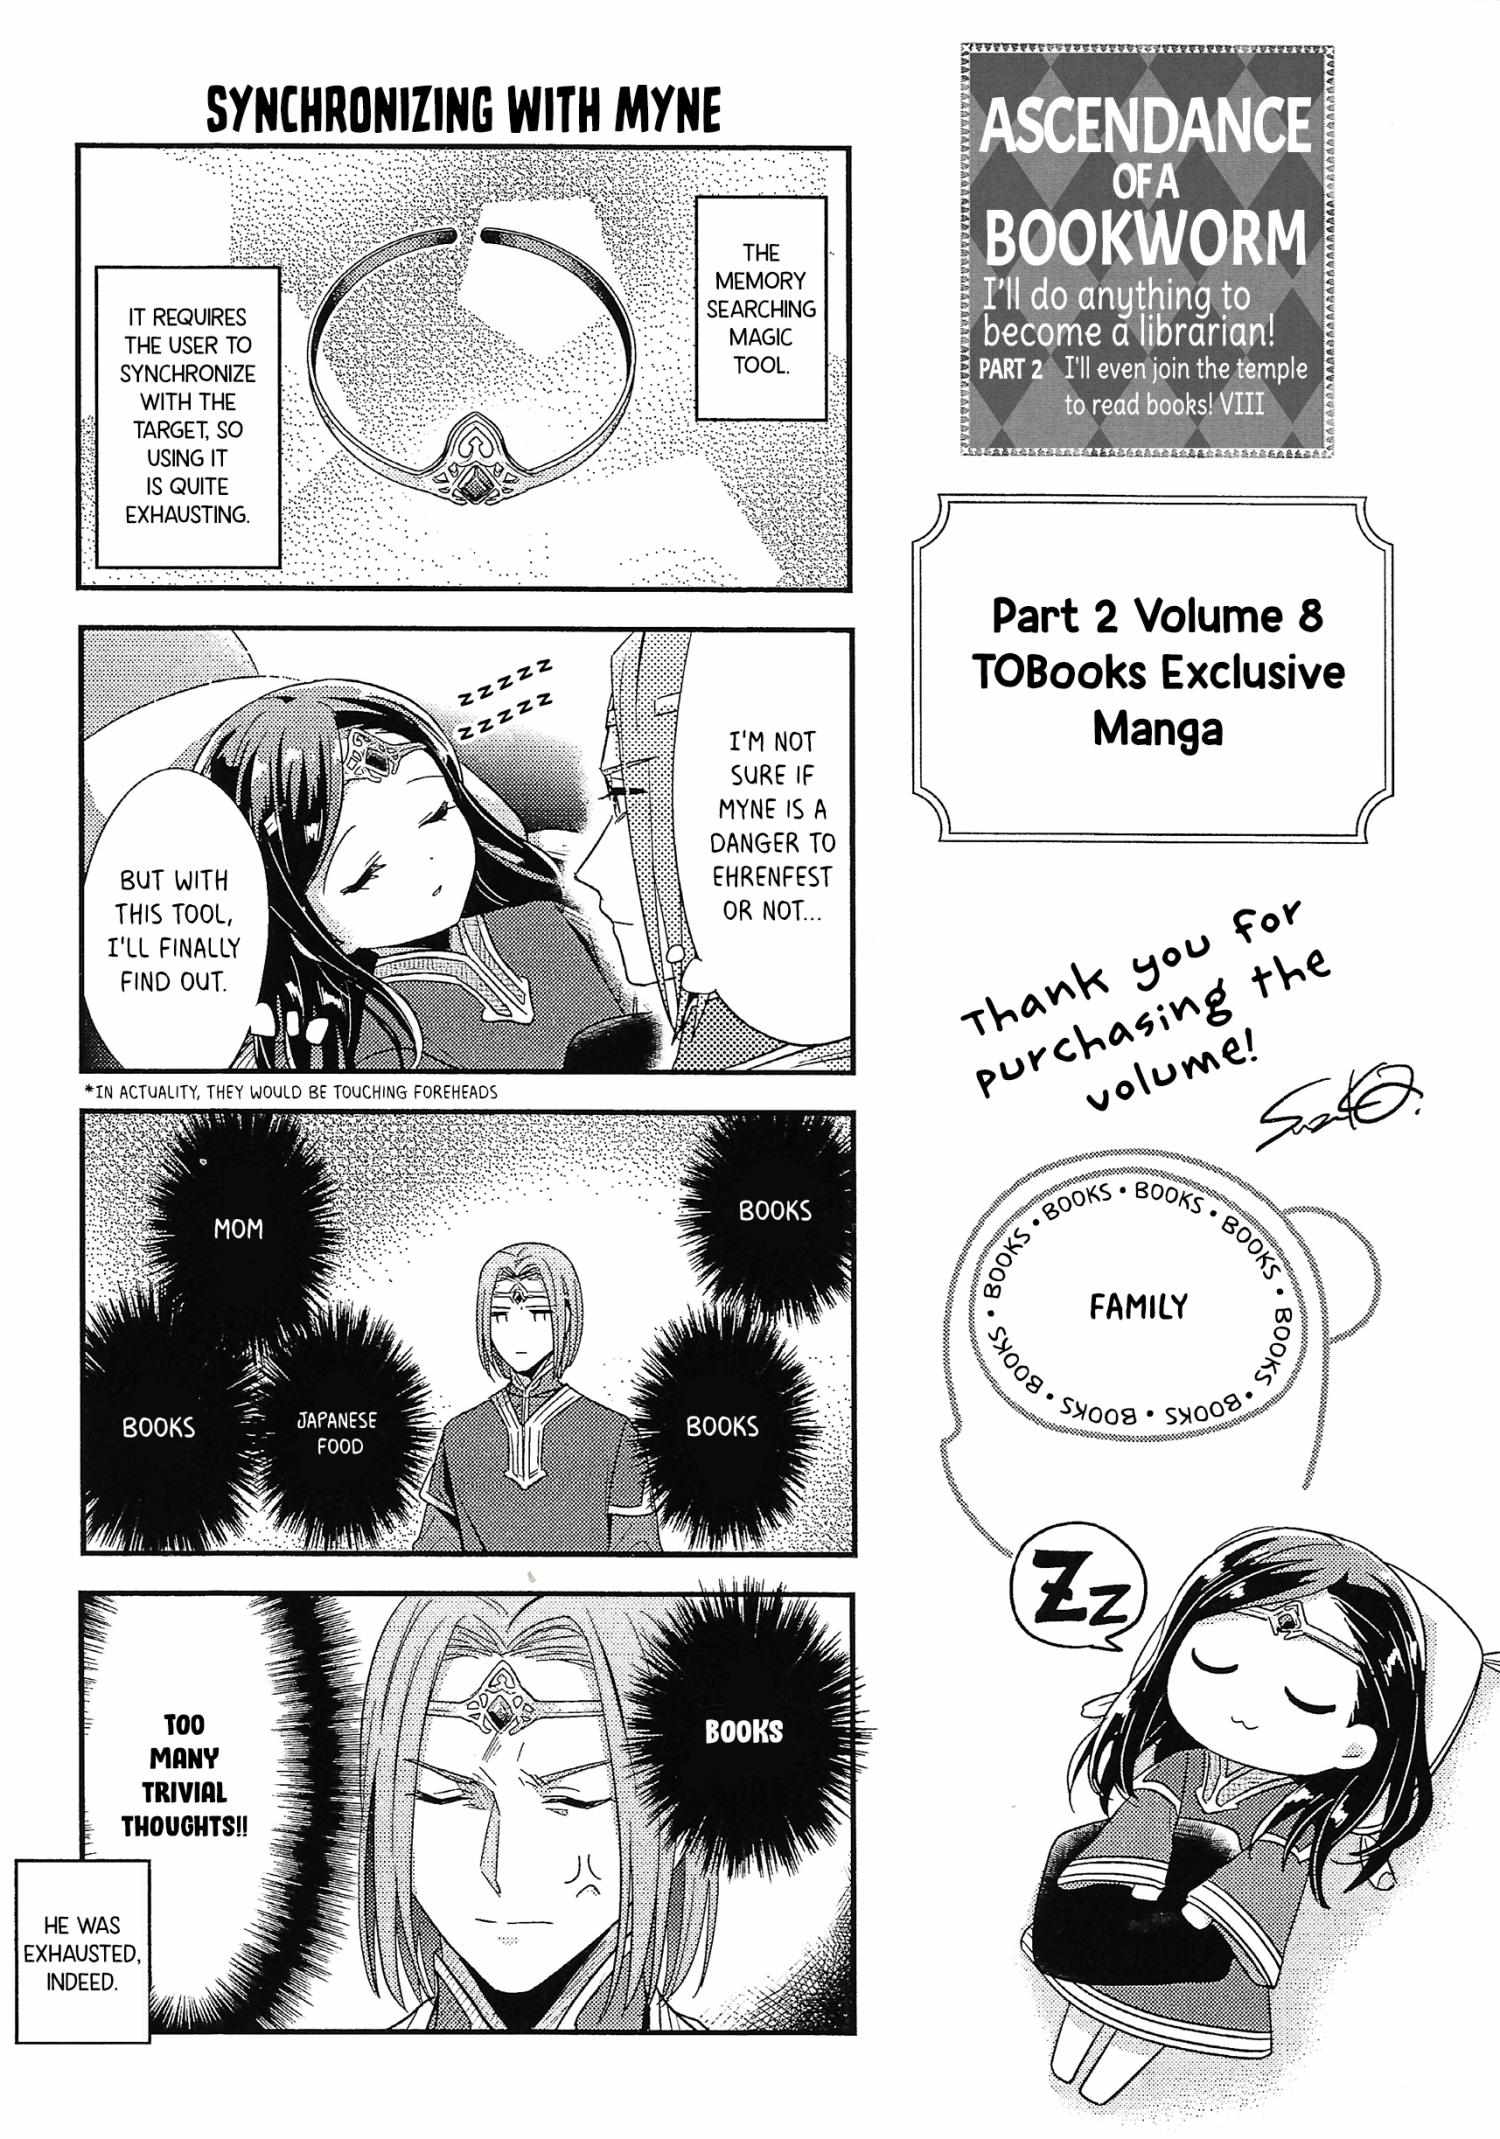 Ascendance Of A Bookworm ~I'll Do Anything To Become A Librarian~ Part 2 「I'll Become A Shrine Maiden For Books!」 - 41.7 page 1-c0c07d97